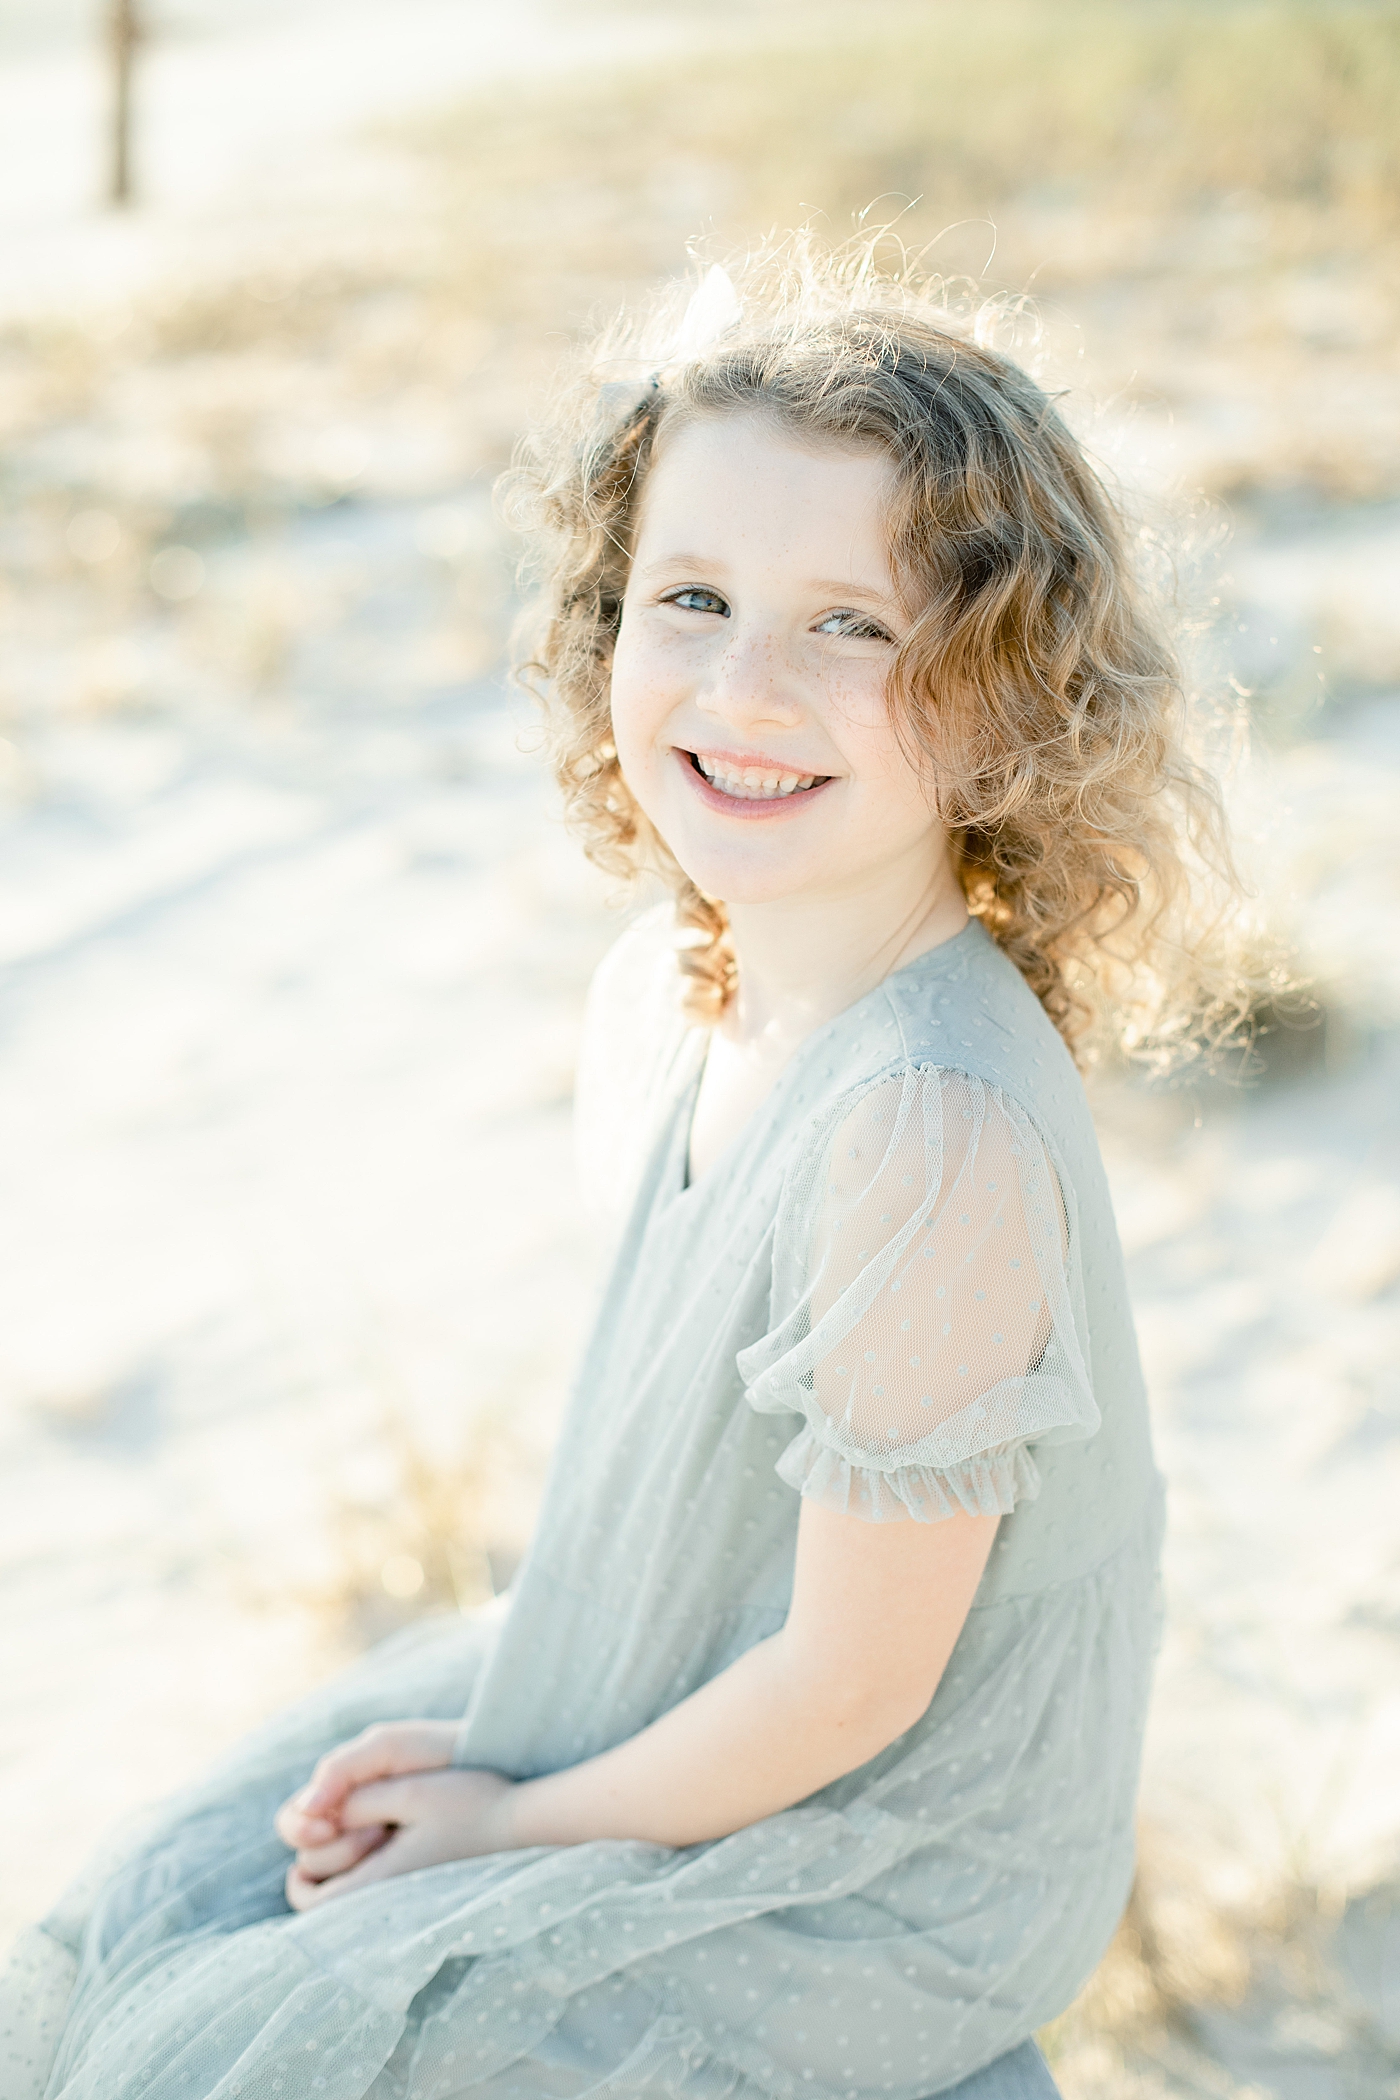  Little girl with red haired curls smiling | Photo by Ocean Springs Family Photographer Little Sunshine Photography